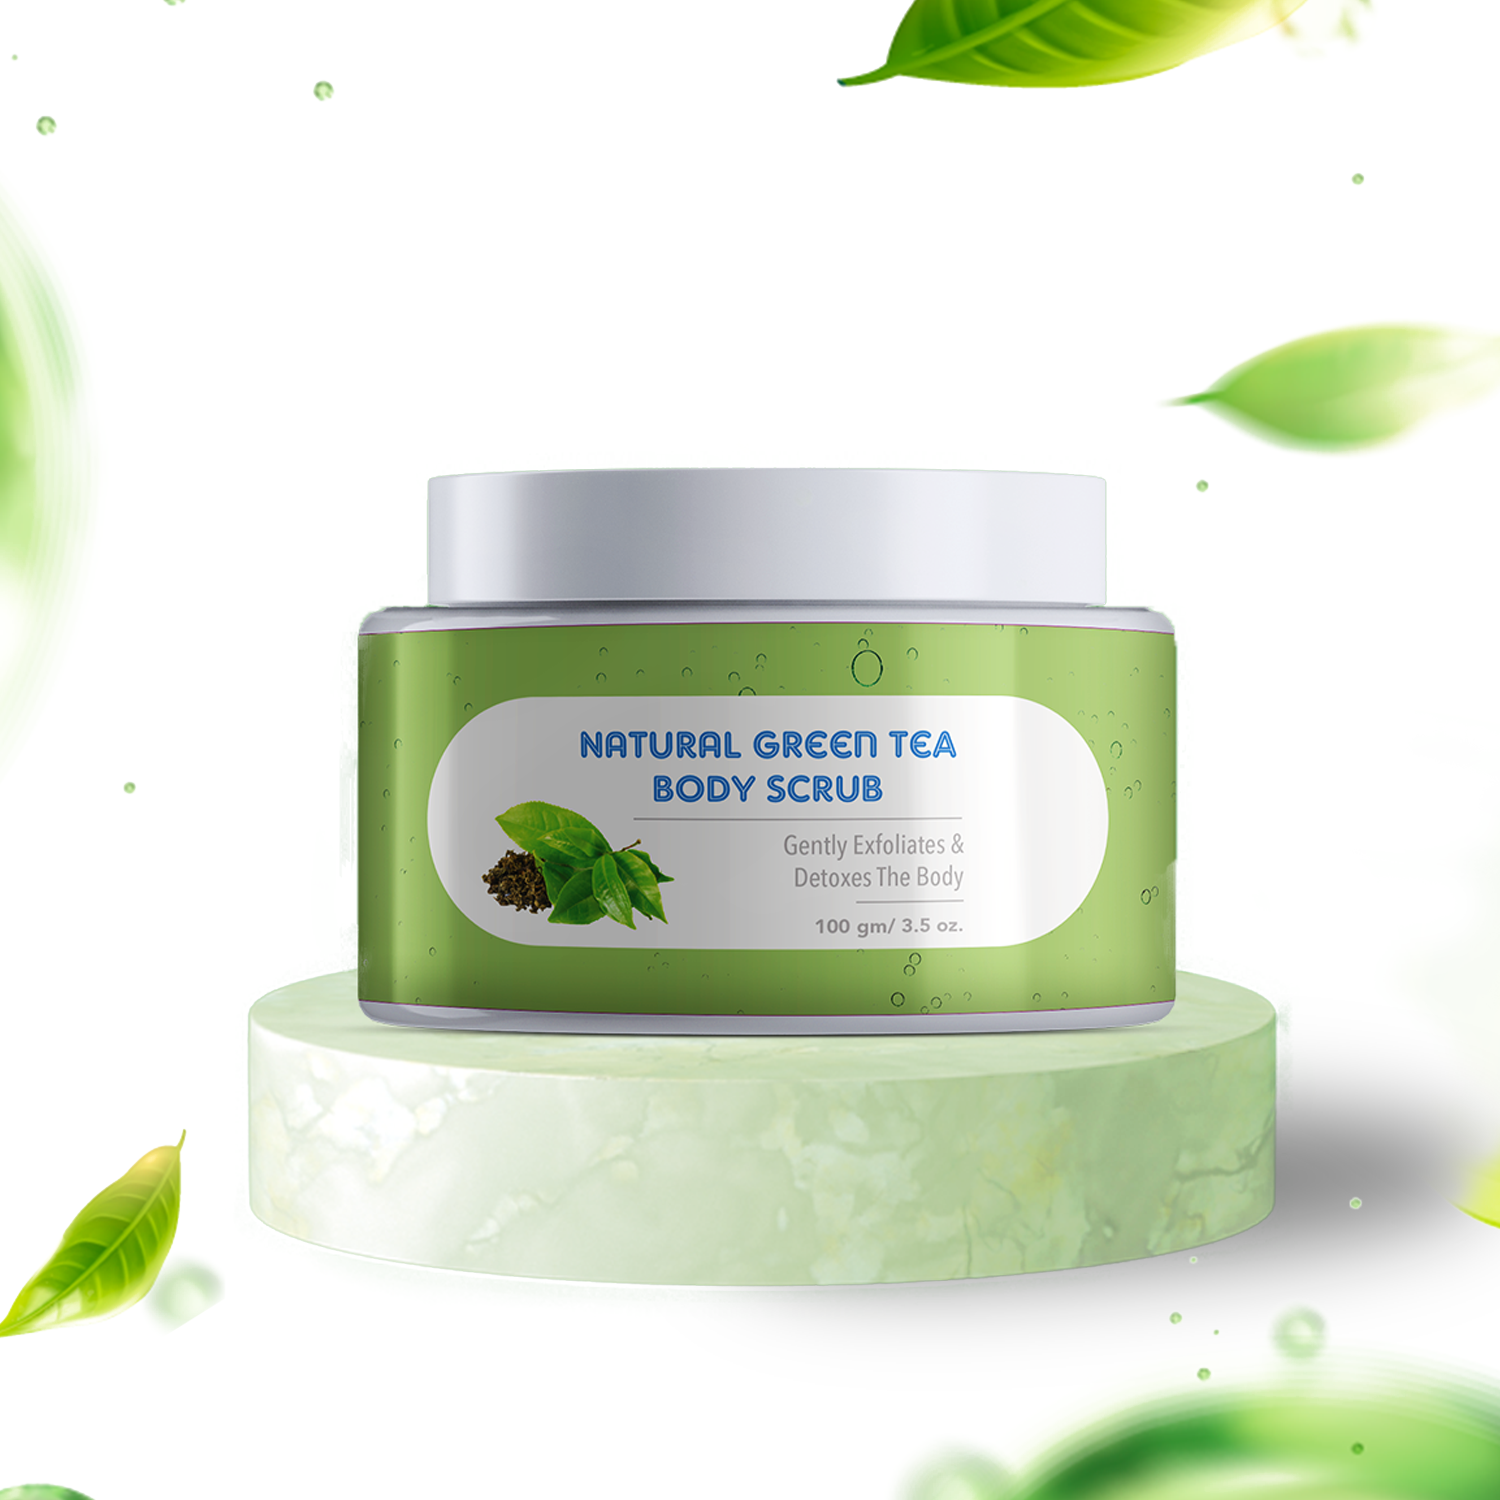 The Moms Co. Natural Green Tea Body Scrub I Gentle Exfoliation & Detox l With Apricot seed, Black Sand and Vitamin C (100 gm)